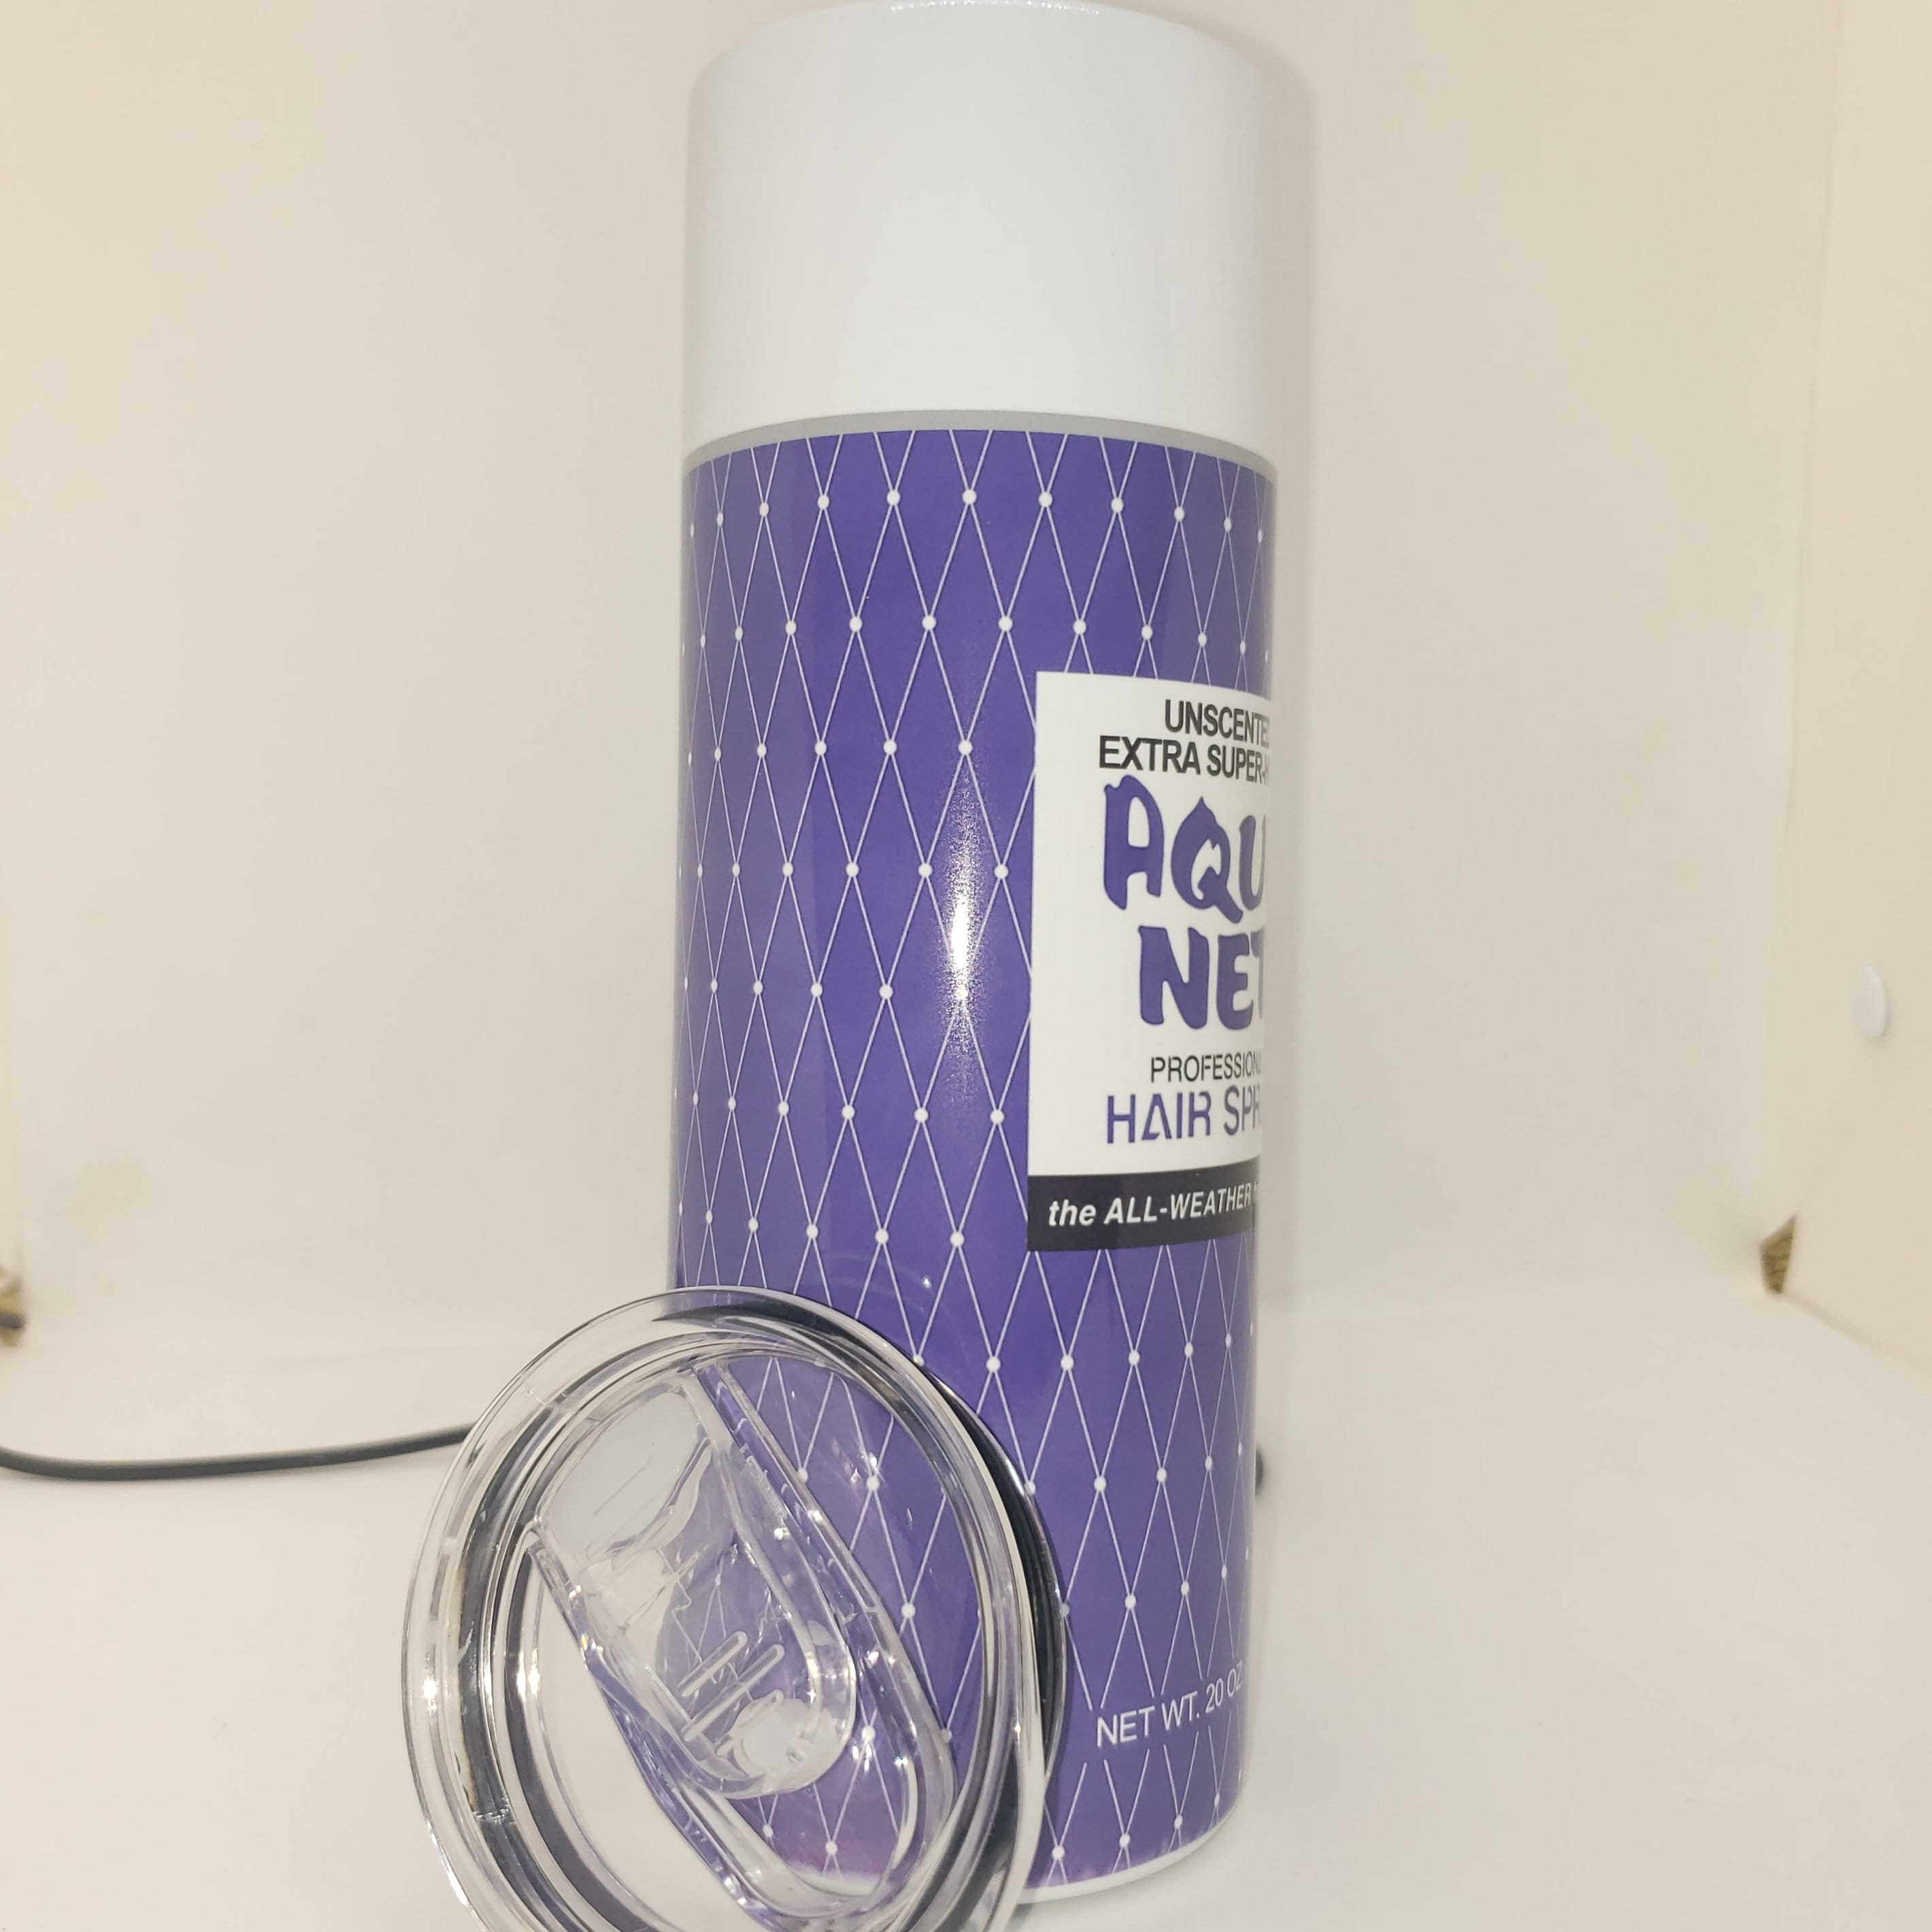 Aqua Net Hairspray Image on an Insulated 20 or 30 Oz. Stainless